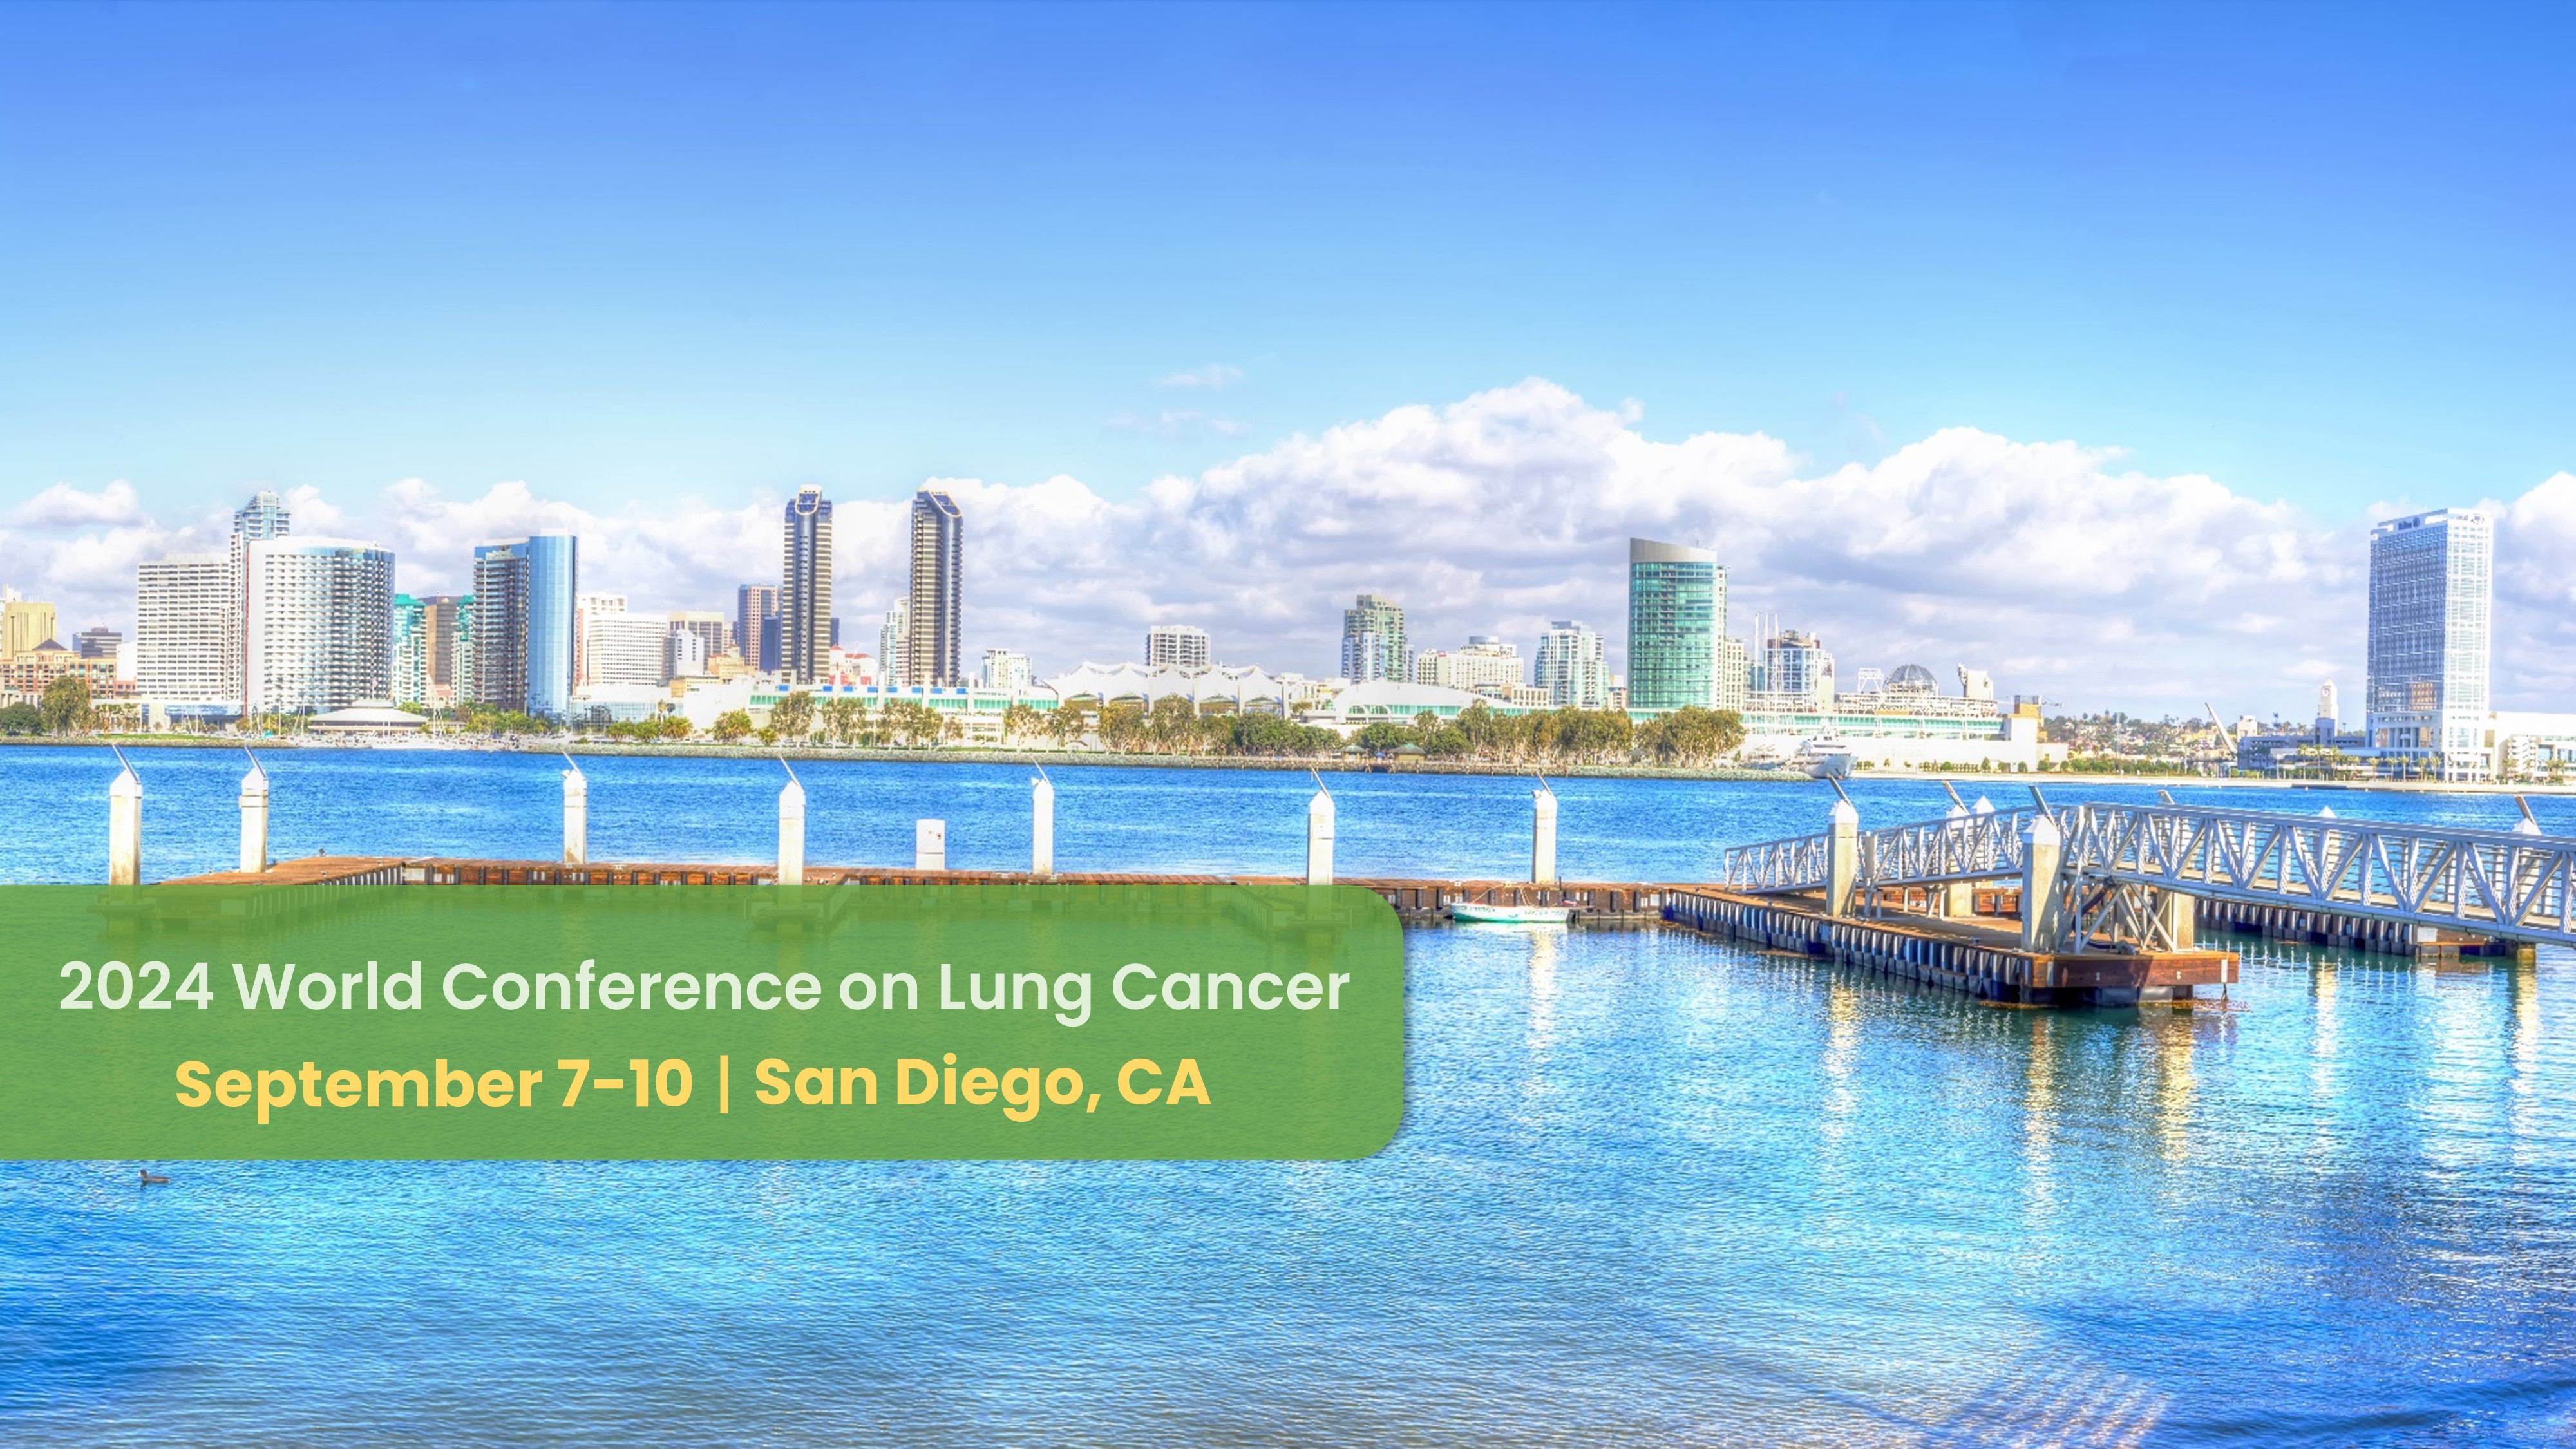 2024 World Conference on Lung Cancer (WCLC)